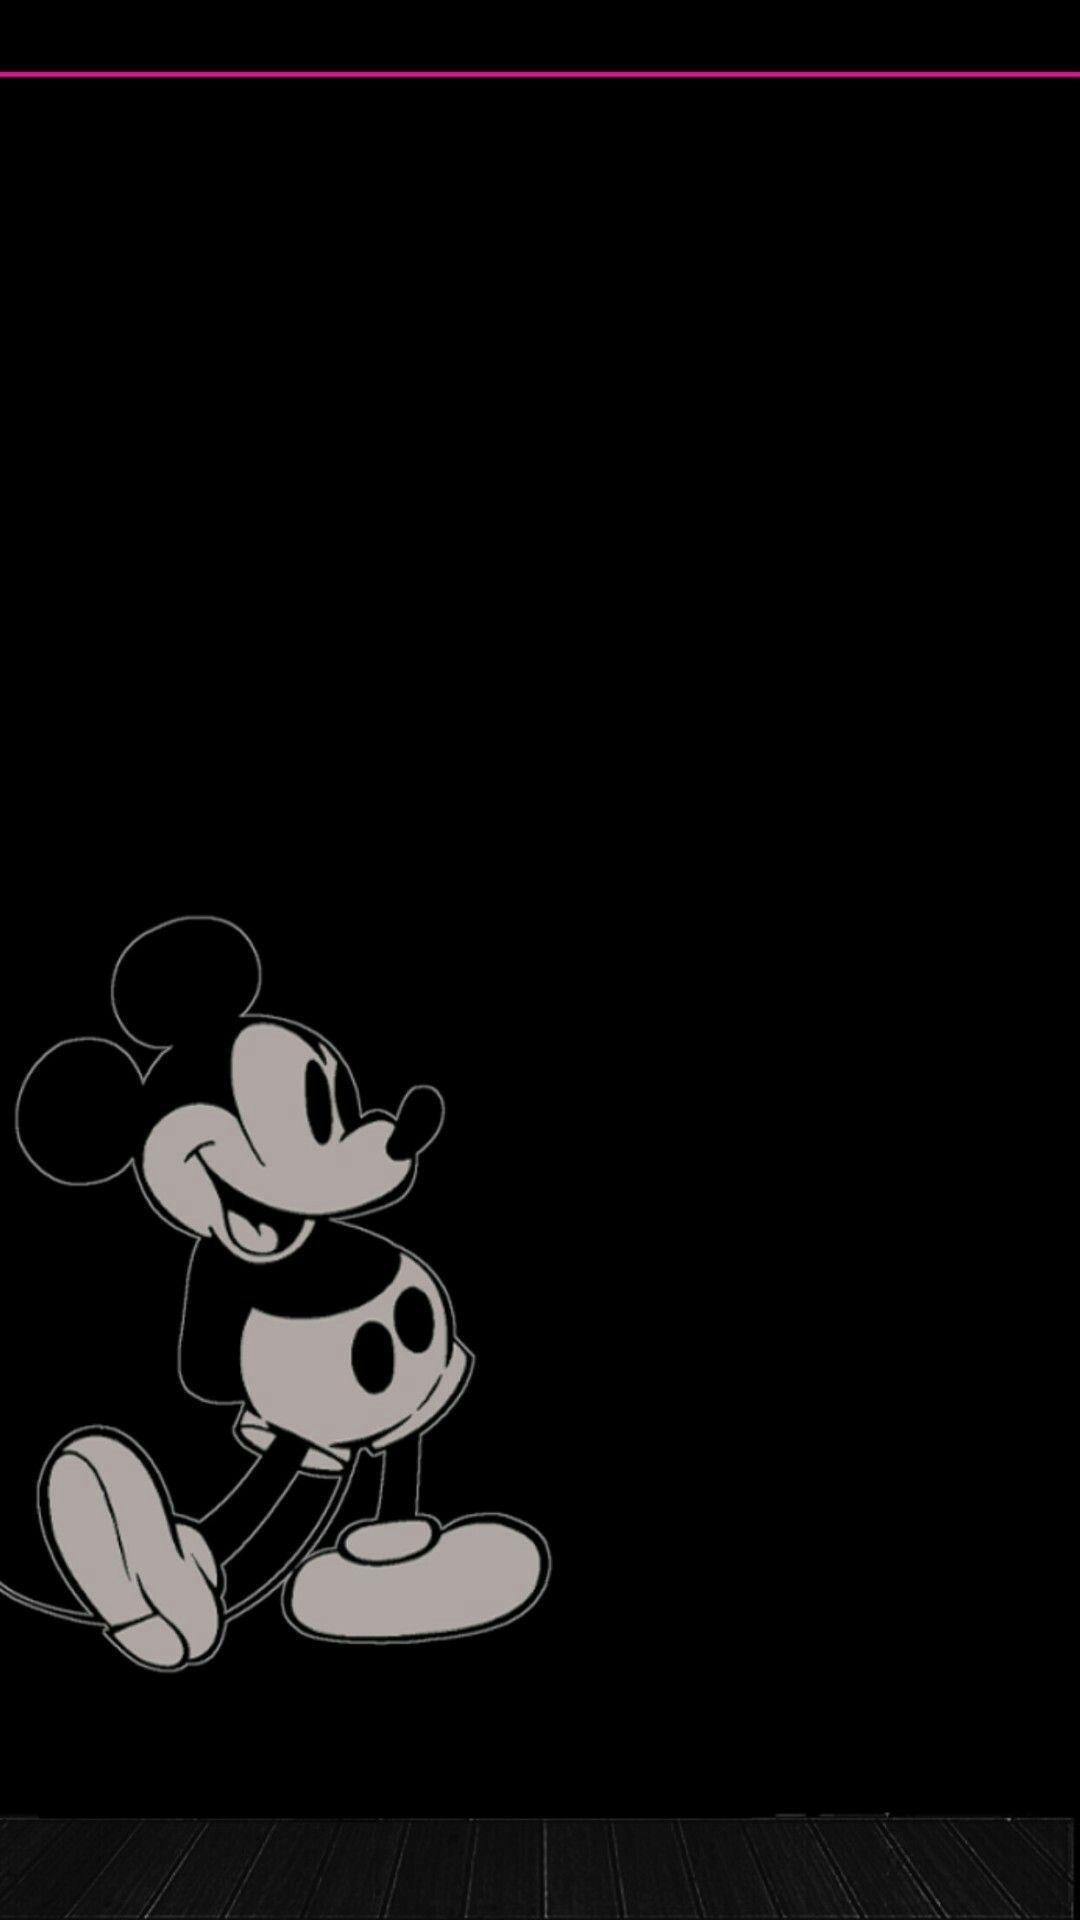 Minnie Mouse iPhone Wallpapers on